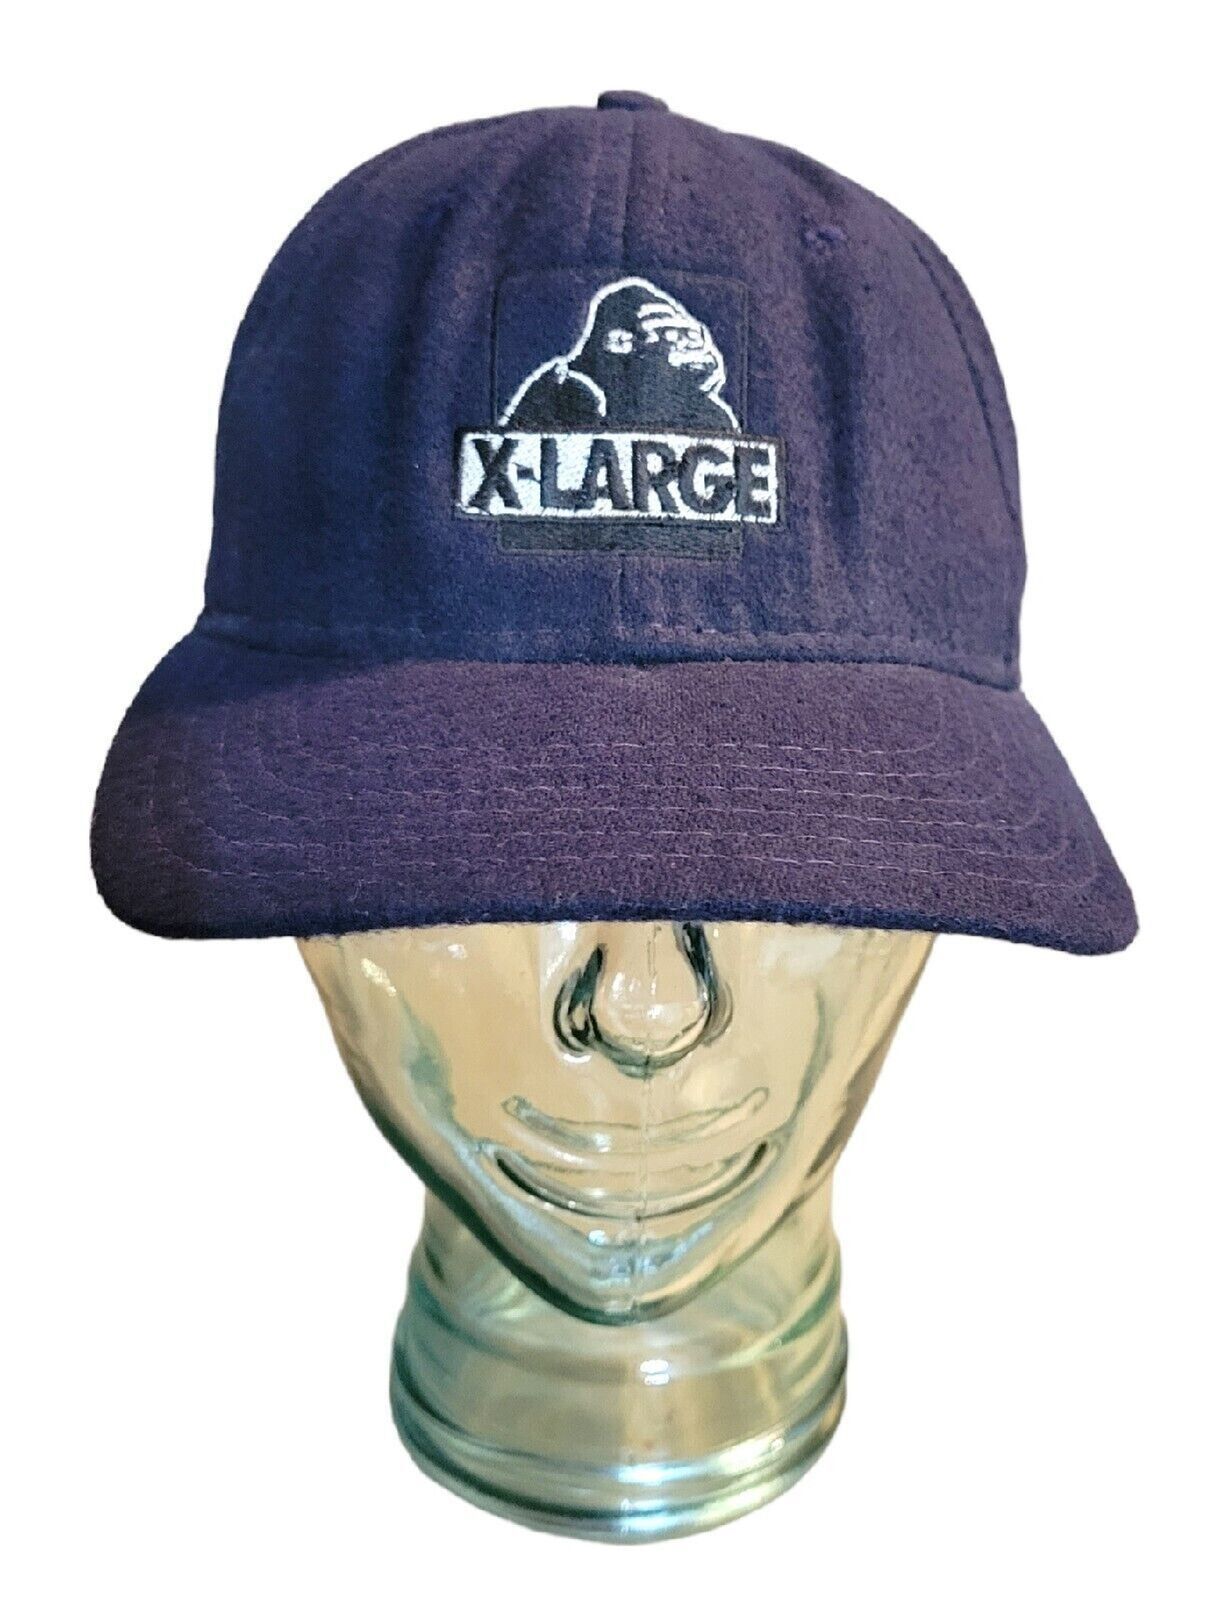 Primary image for Vintage 90s X-Large Streetwear Clothing Wool Baseball Hat Cap Made In USA